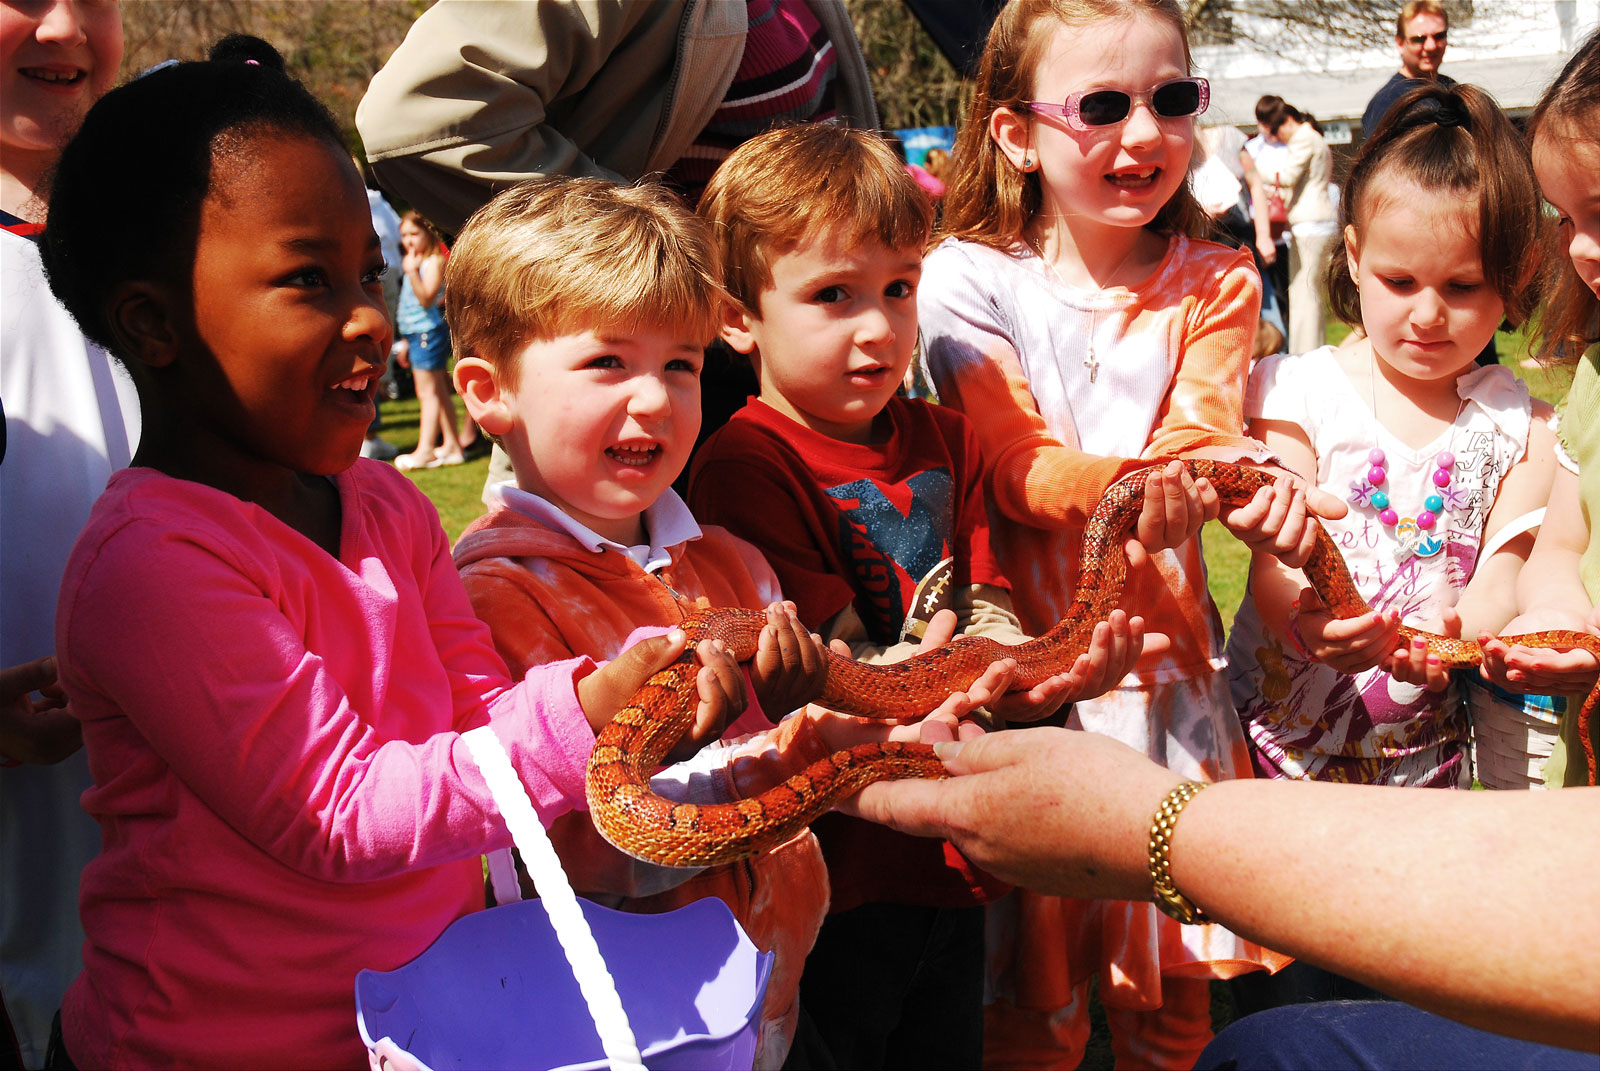 Group of youth holding a snake.